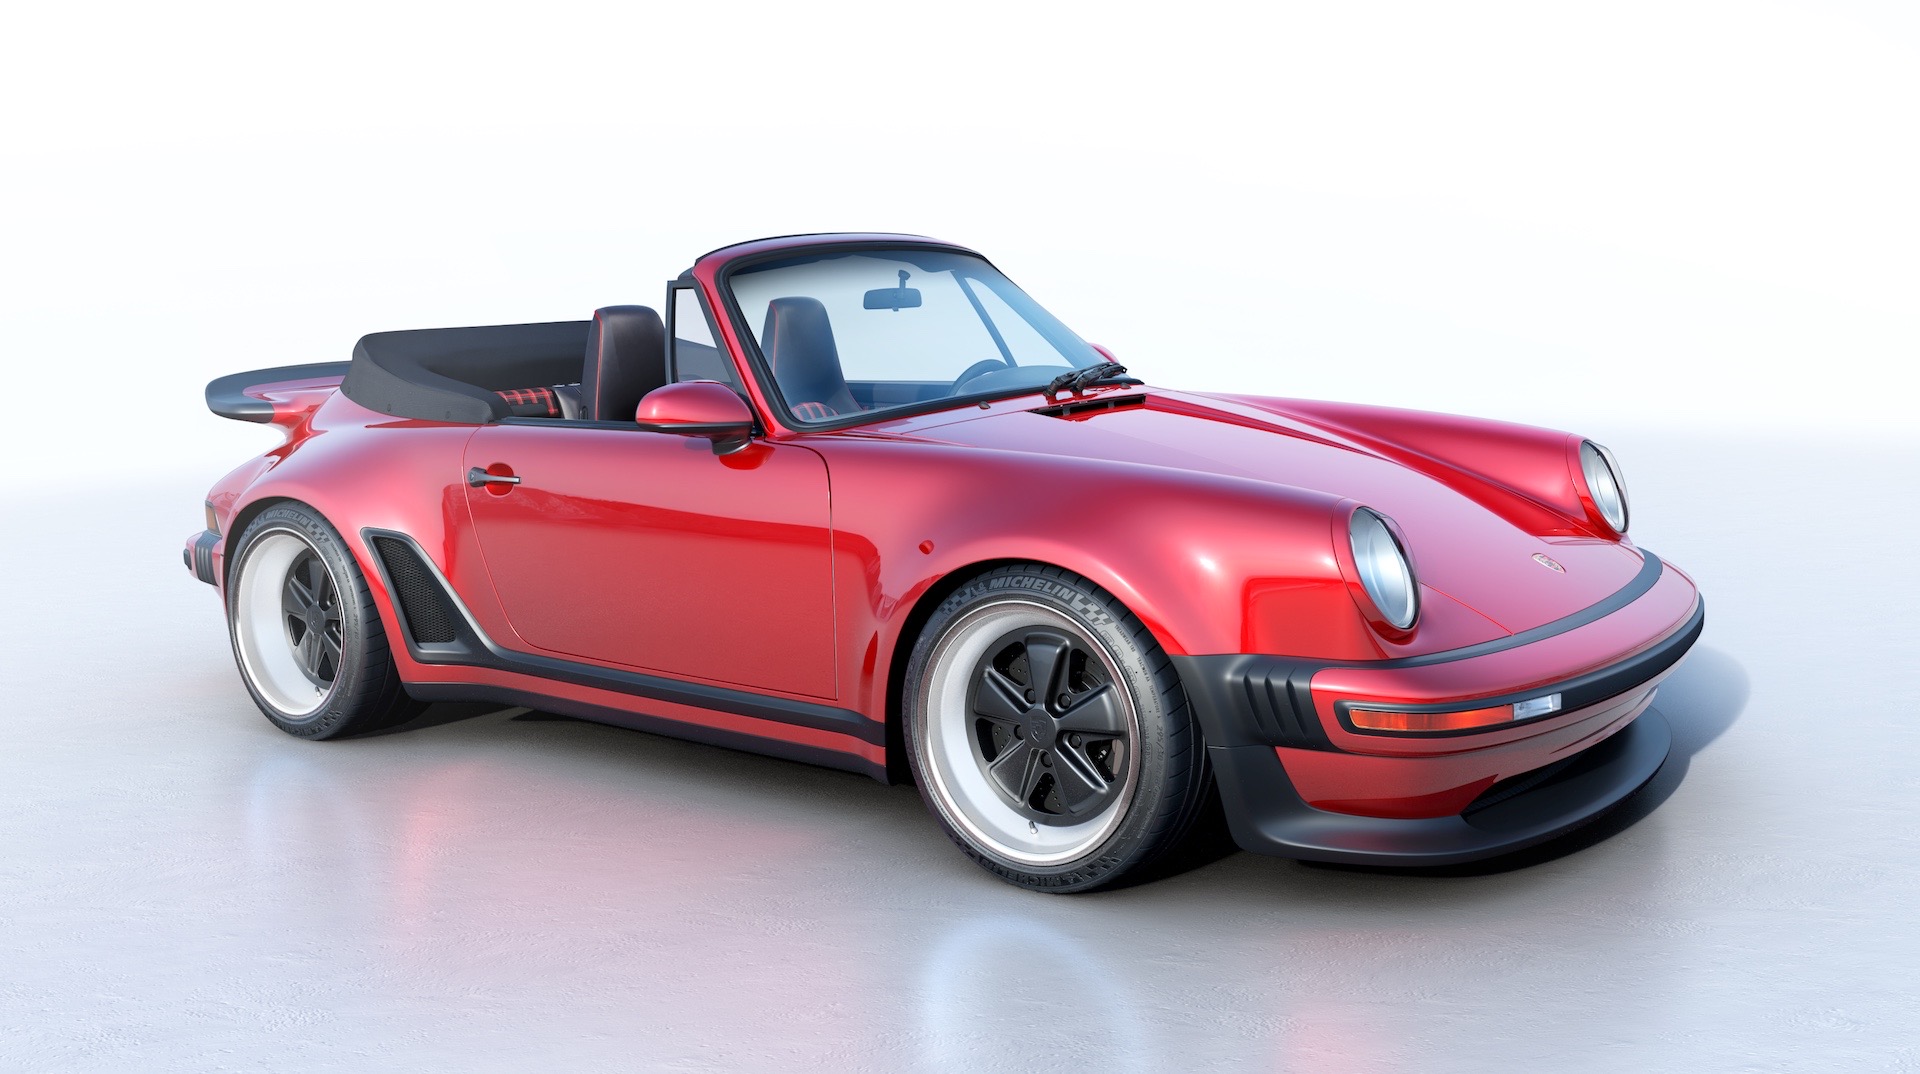 Singer releases stunning Turbo Study for 964 Porsche 911 cabriolet